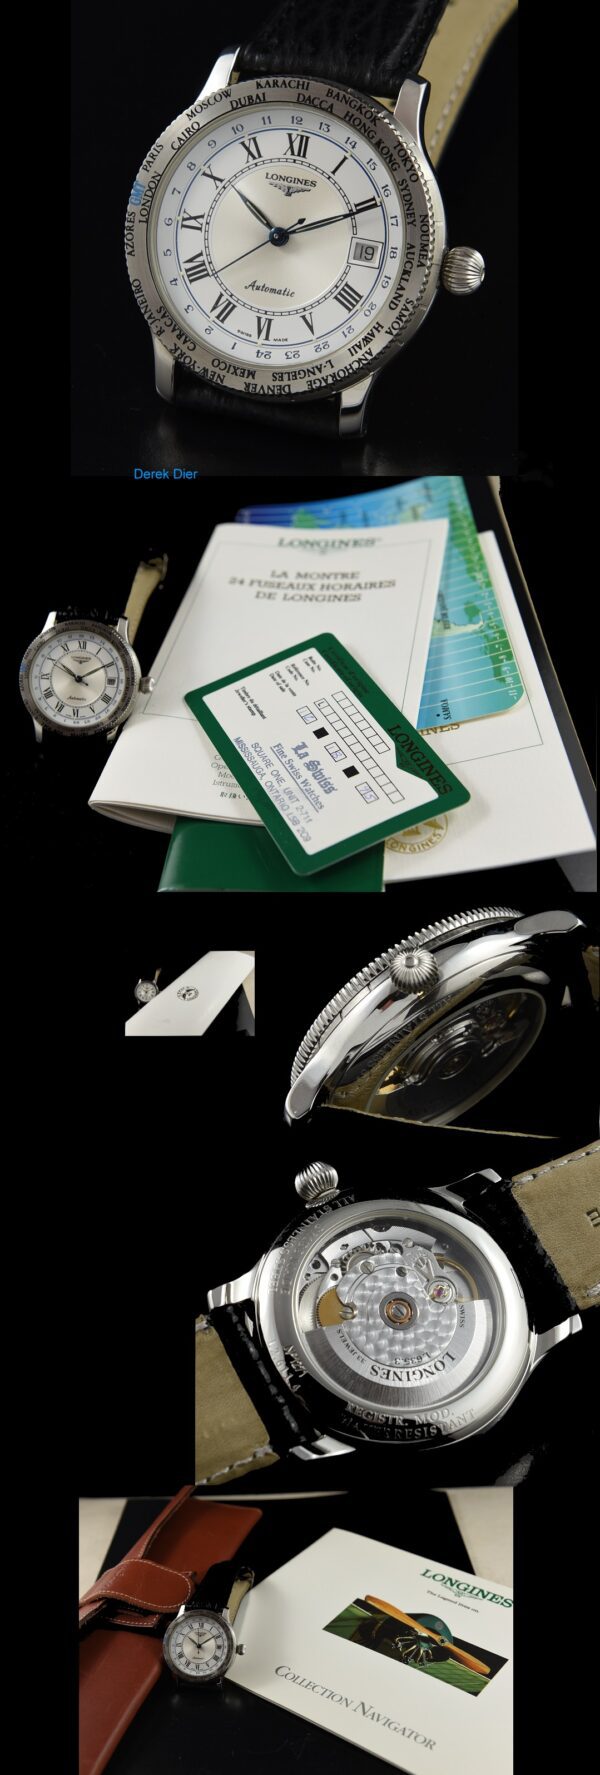 1995 Longines Lindbergh GMT stainless steel watch with original 24-hour universal time, box, papers, rotating bezel, and automatic movement.